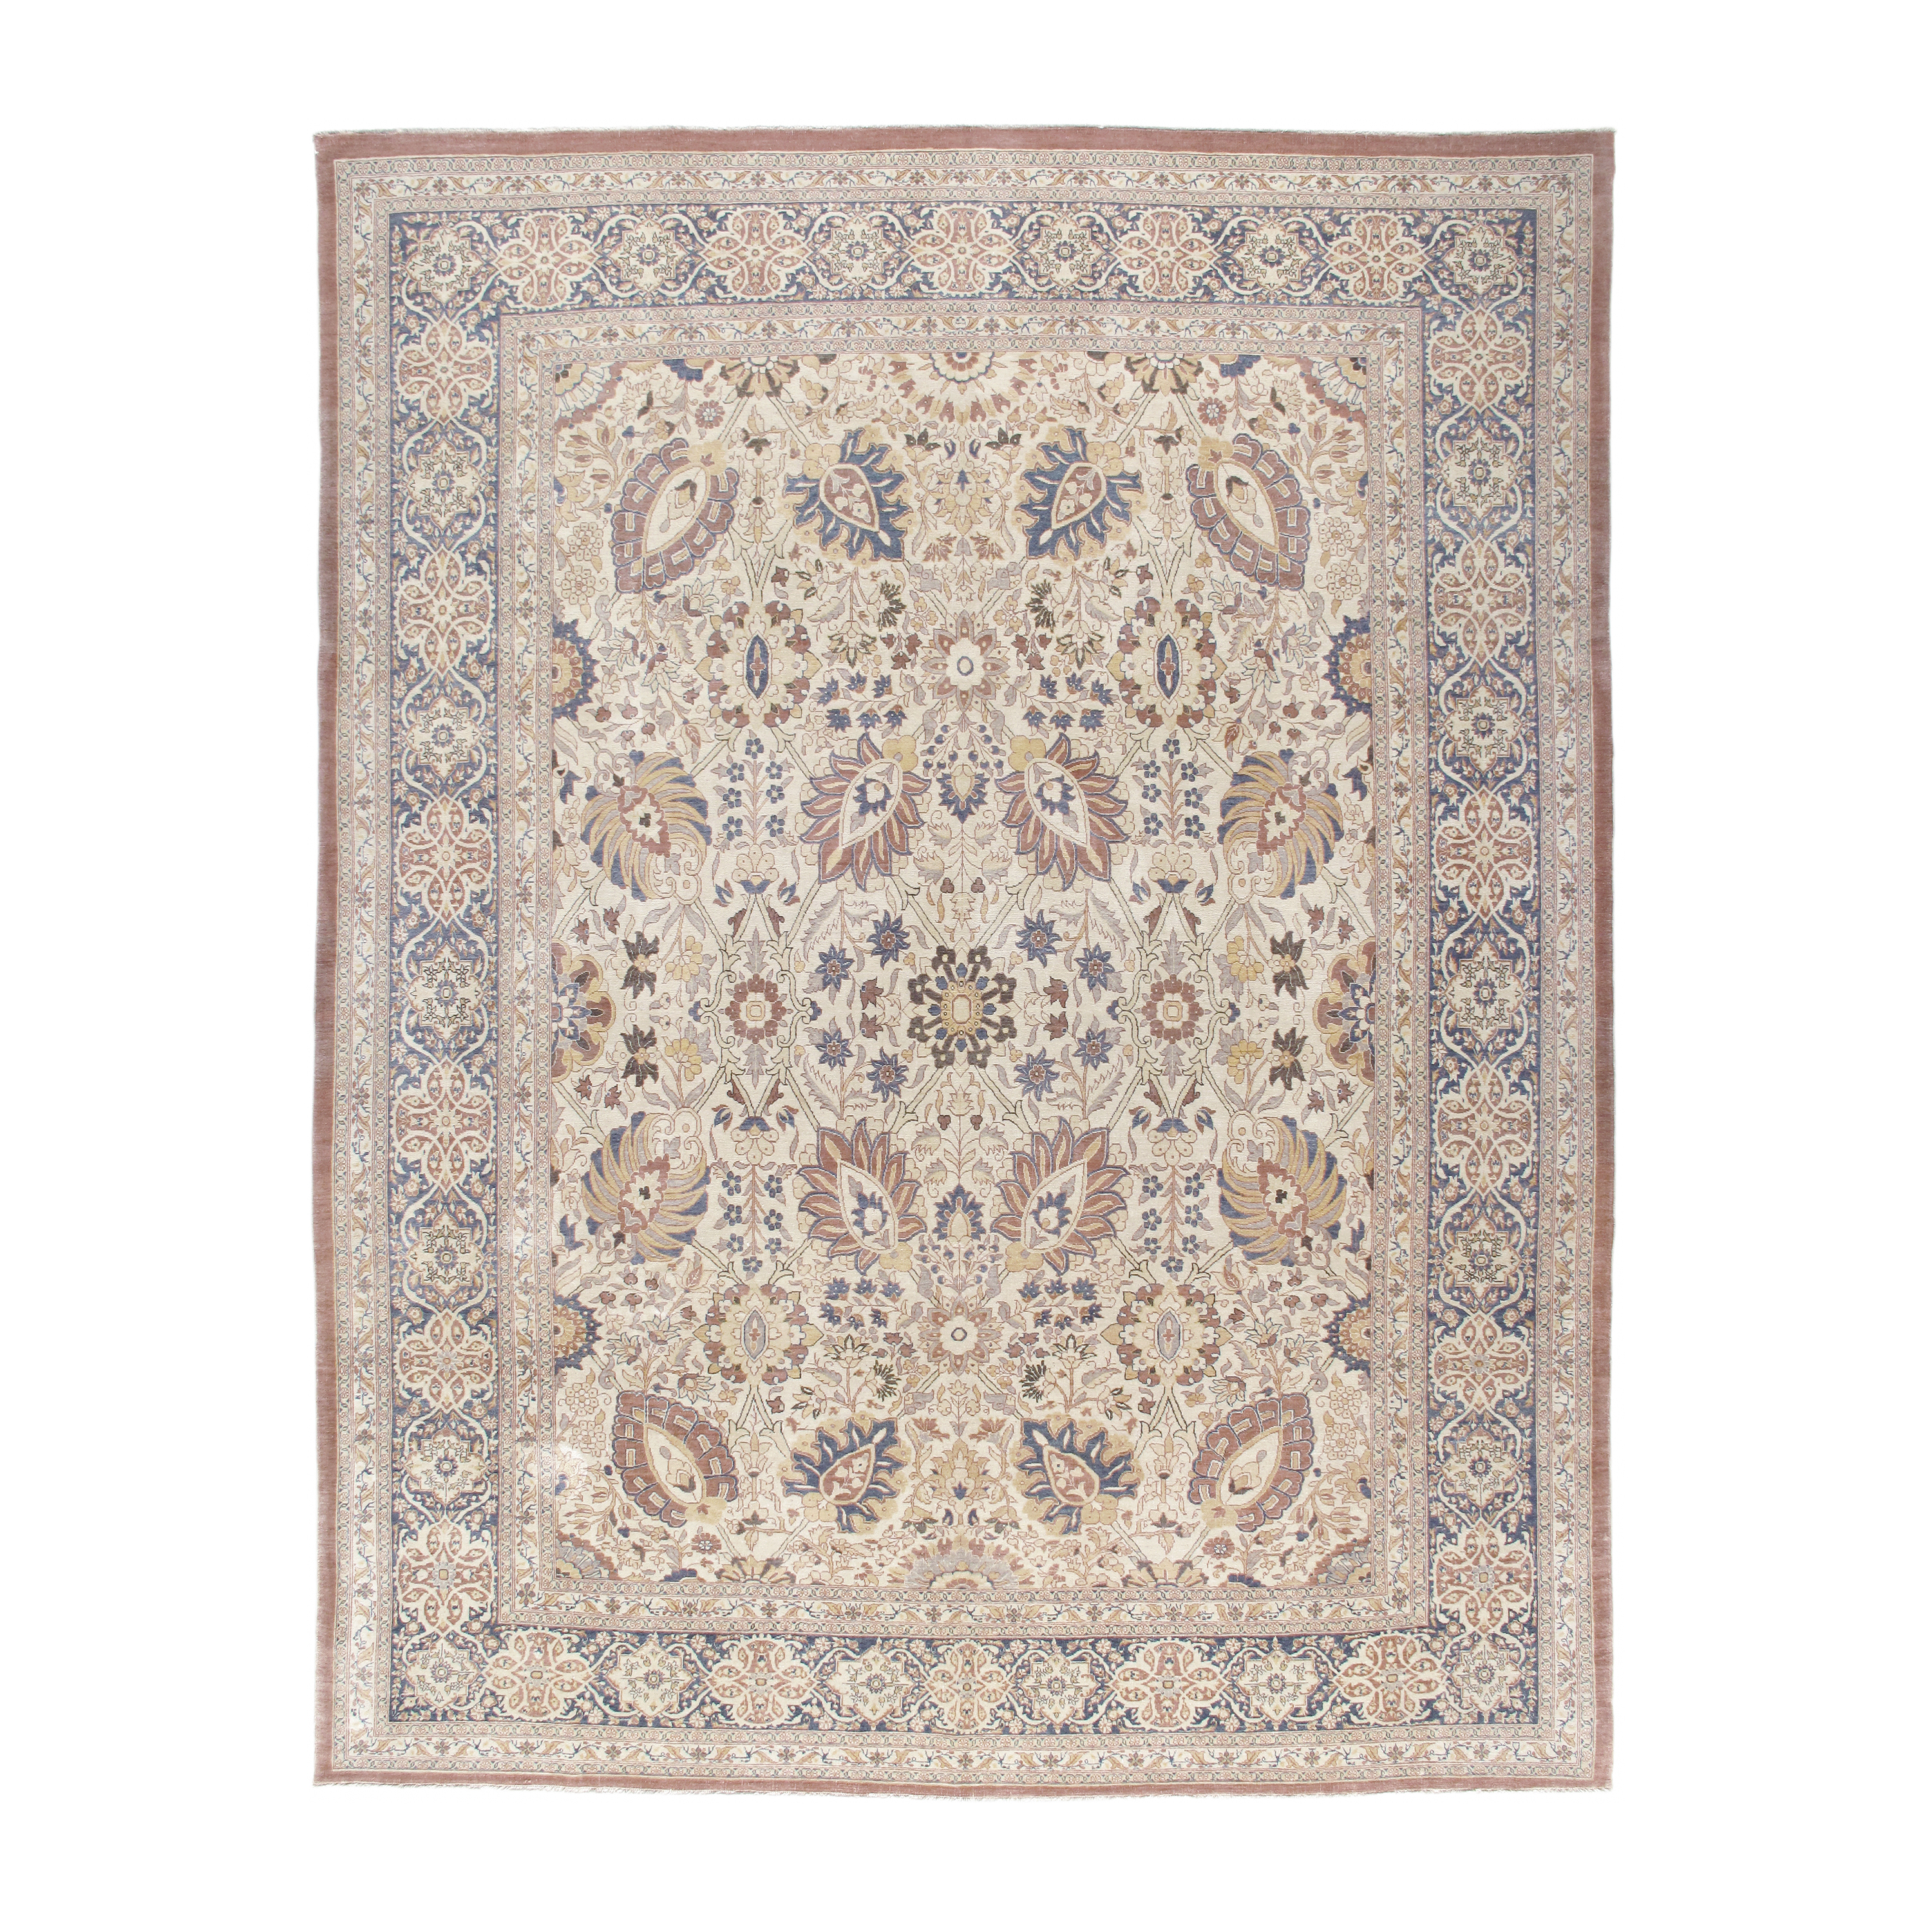 This Persian Tabriz rug is made of 100% wool.